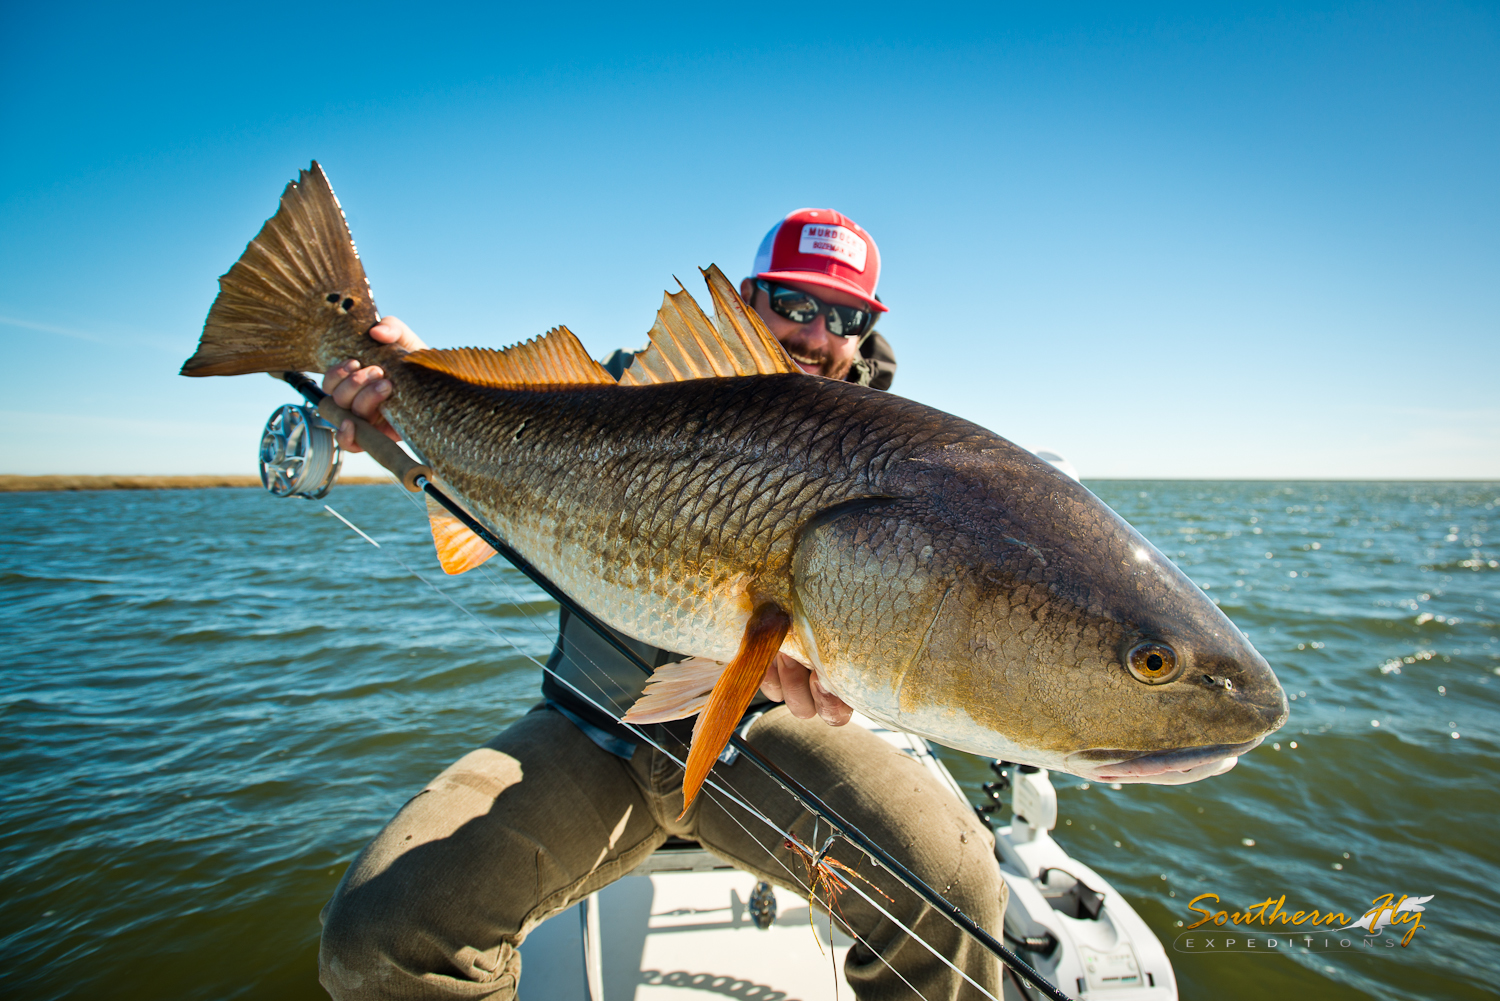 Louisiana Fly Fishing with Southern Fly Expeditions and Cpatain Brandon Keck